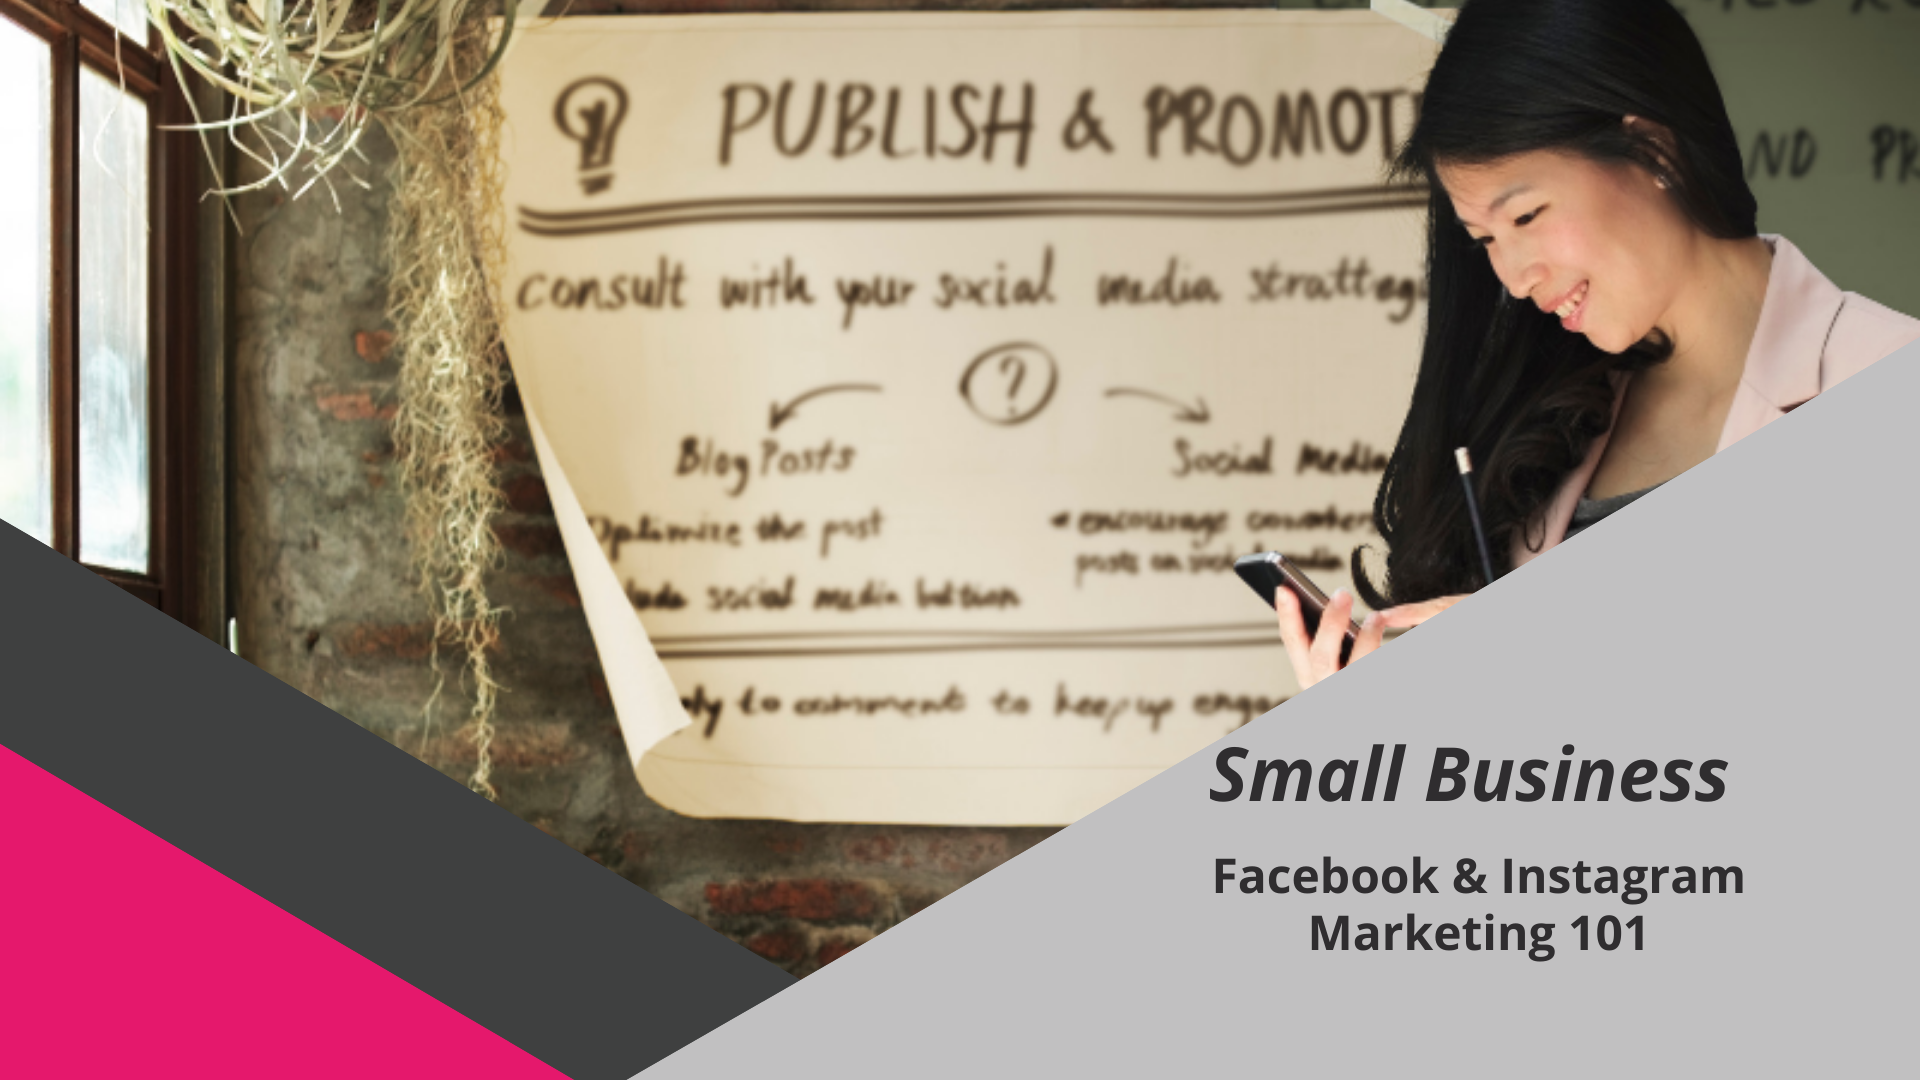 Small Business Facebook & Instagram Marketing 101 (10th of June) 